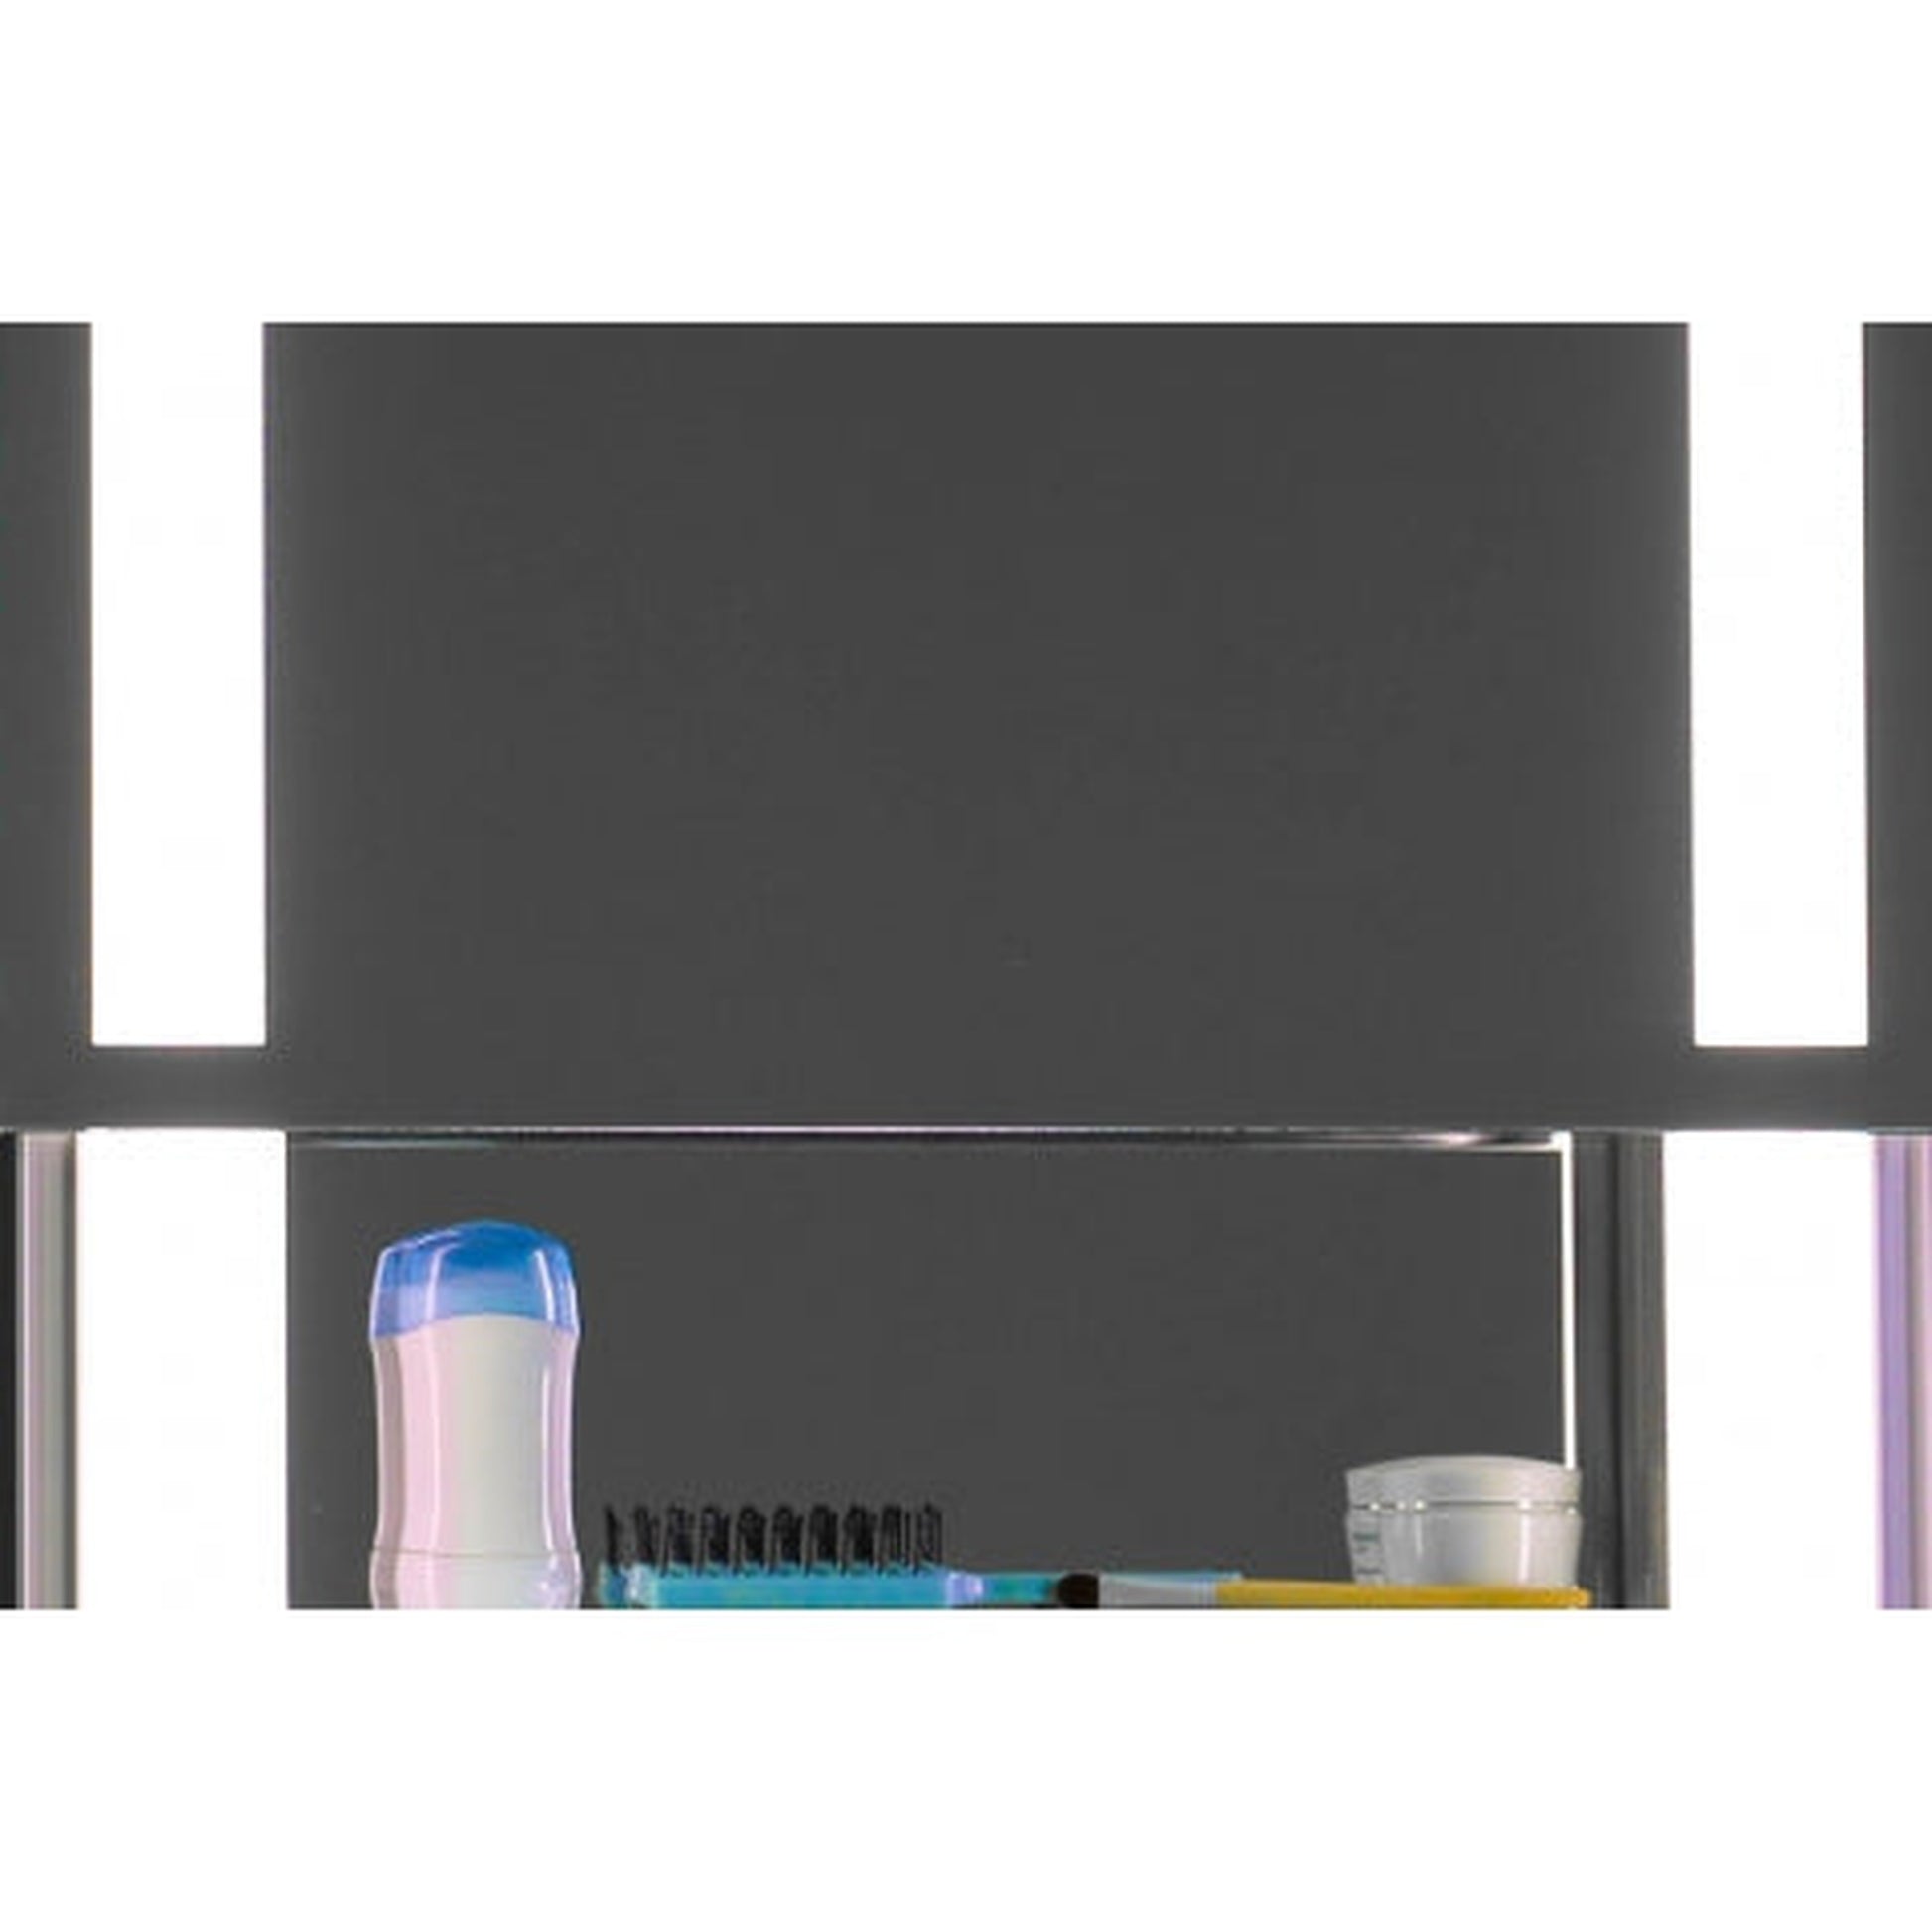 Sidler SideLight 23" x 29" 4000K Single Gliding Mirror Door Anodized Aluminum Medicine Cabinet With Built-in GFCI Outlet and USB port